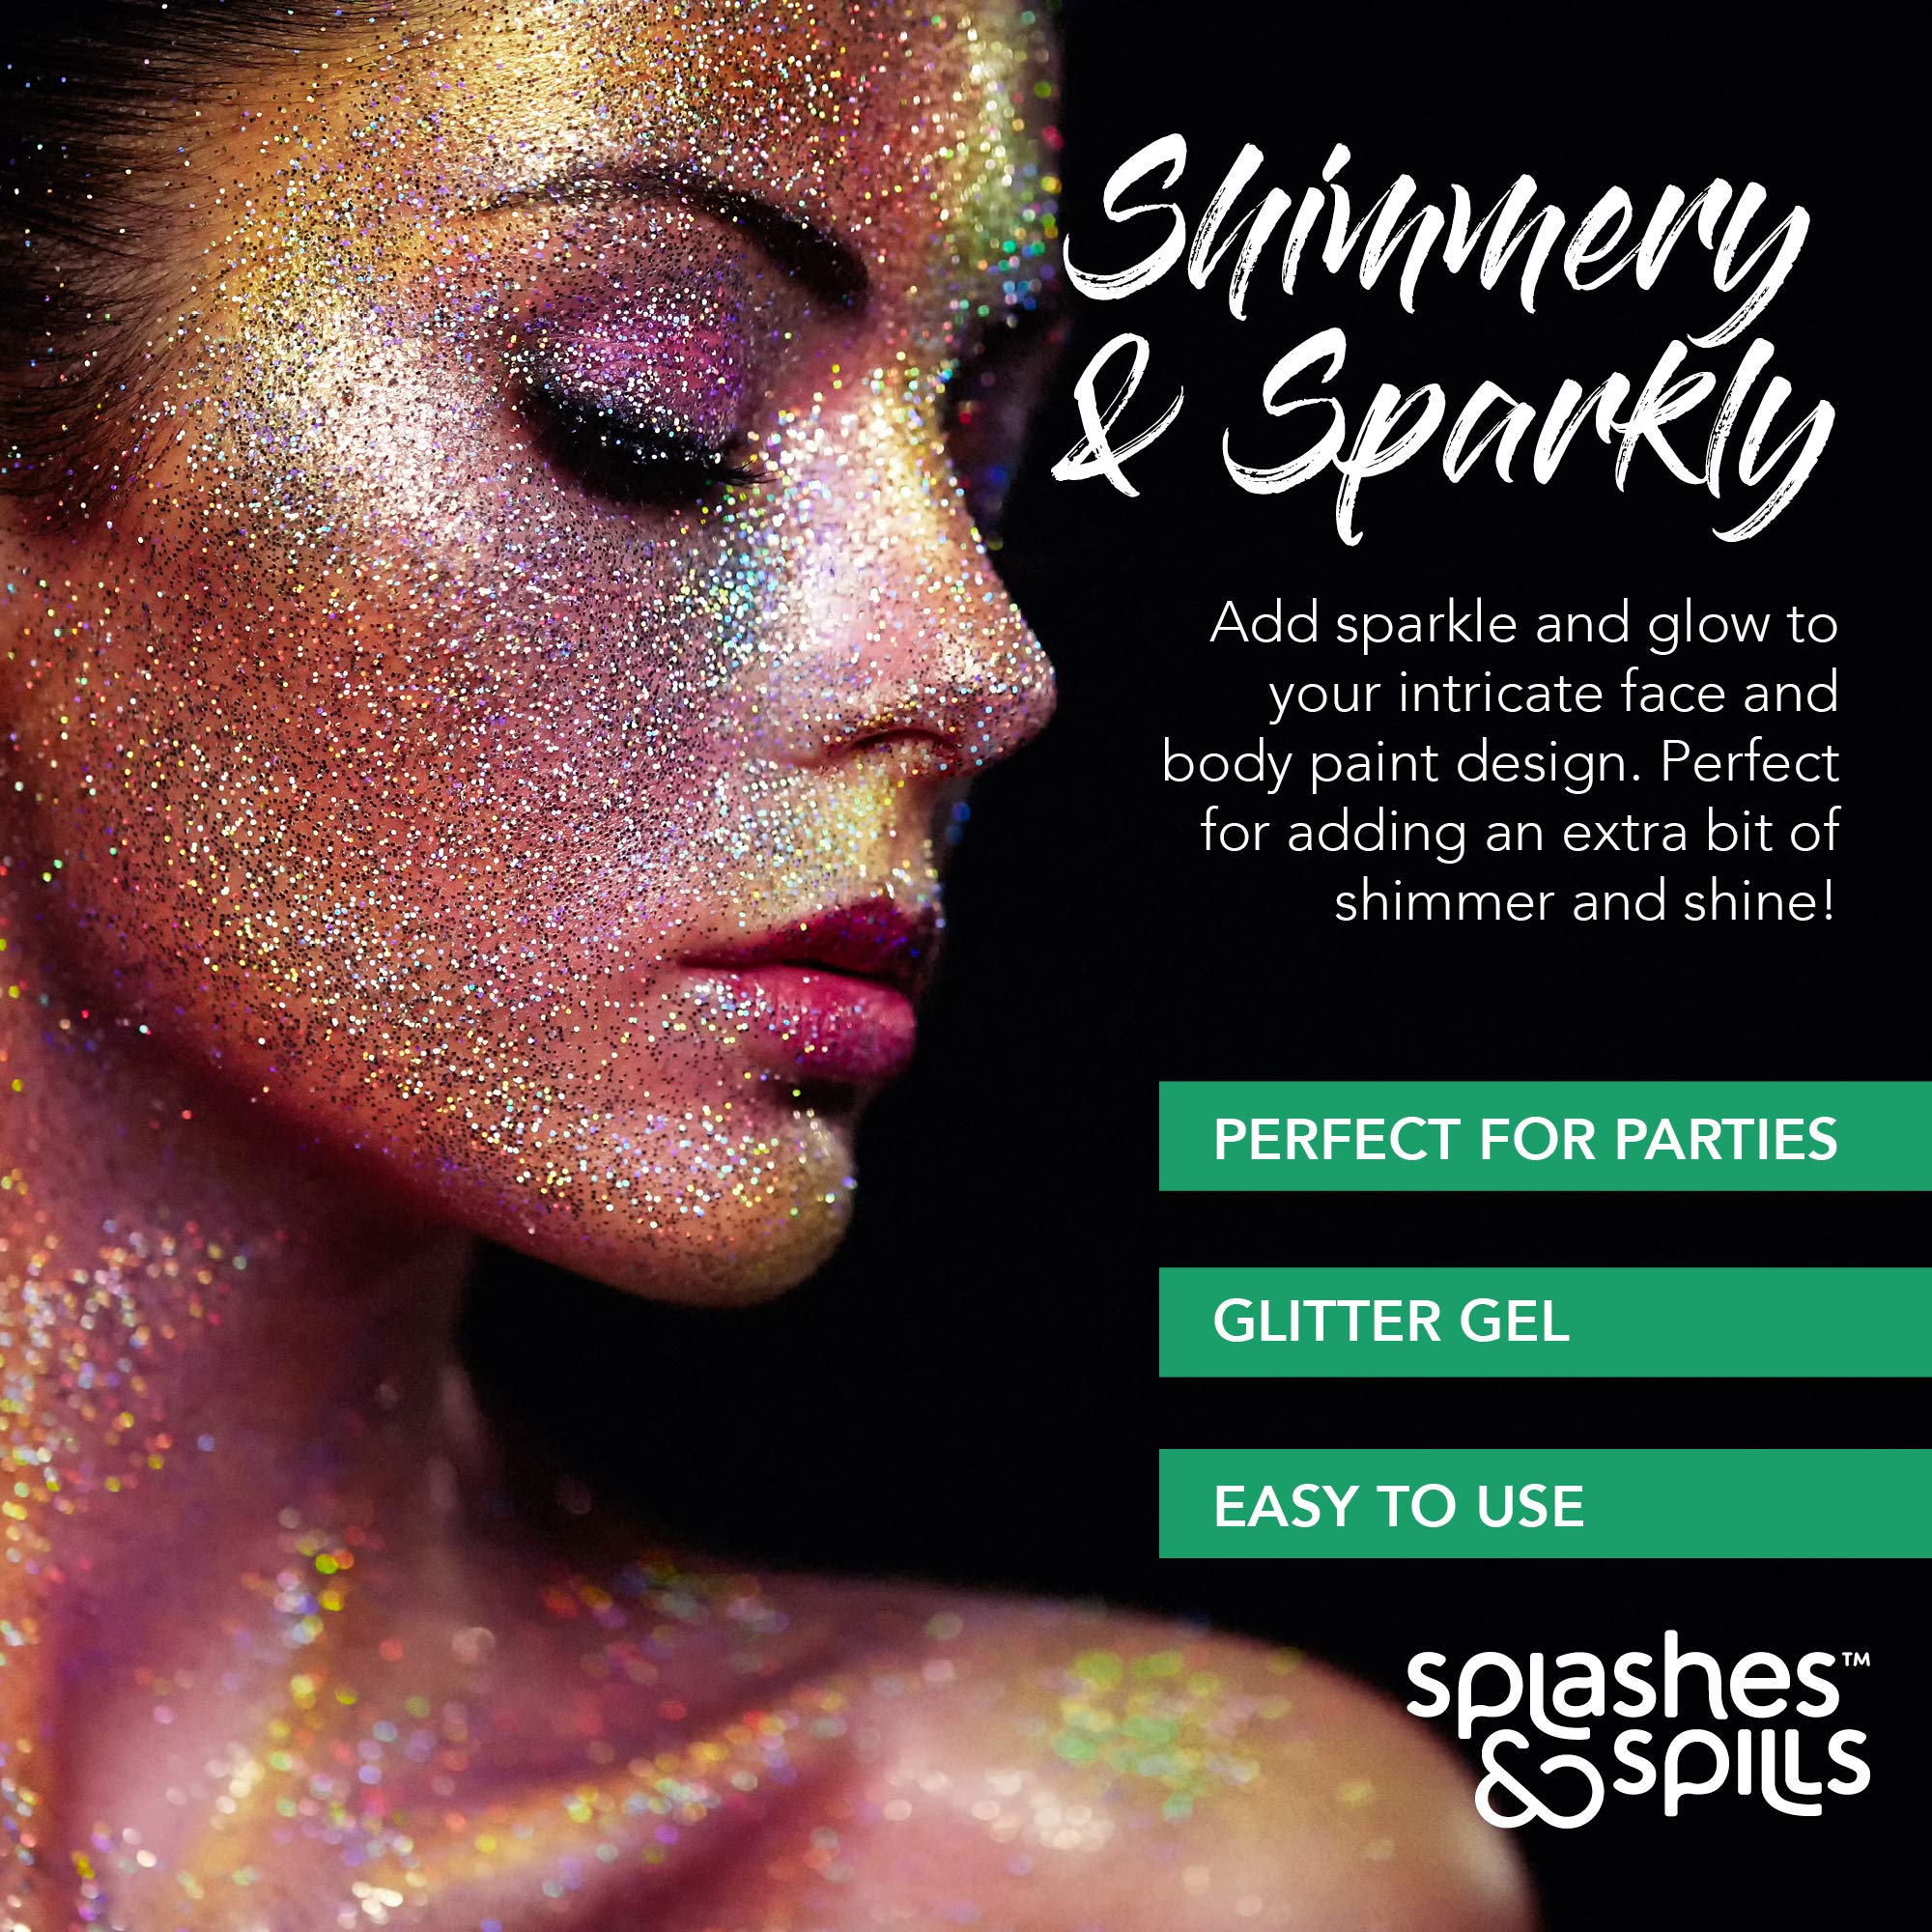 Iridescent Glitter Body Paint Gel - 7 Color Cosmetic Set 10 ml Tubes Shimmer for Hair, Body, Face - Great for Dress Up, Festival, Costume Party, Halloween - by Splashes and Spills